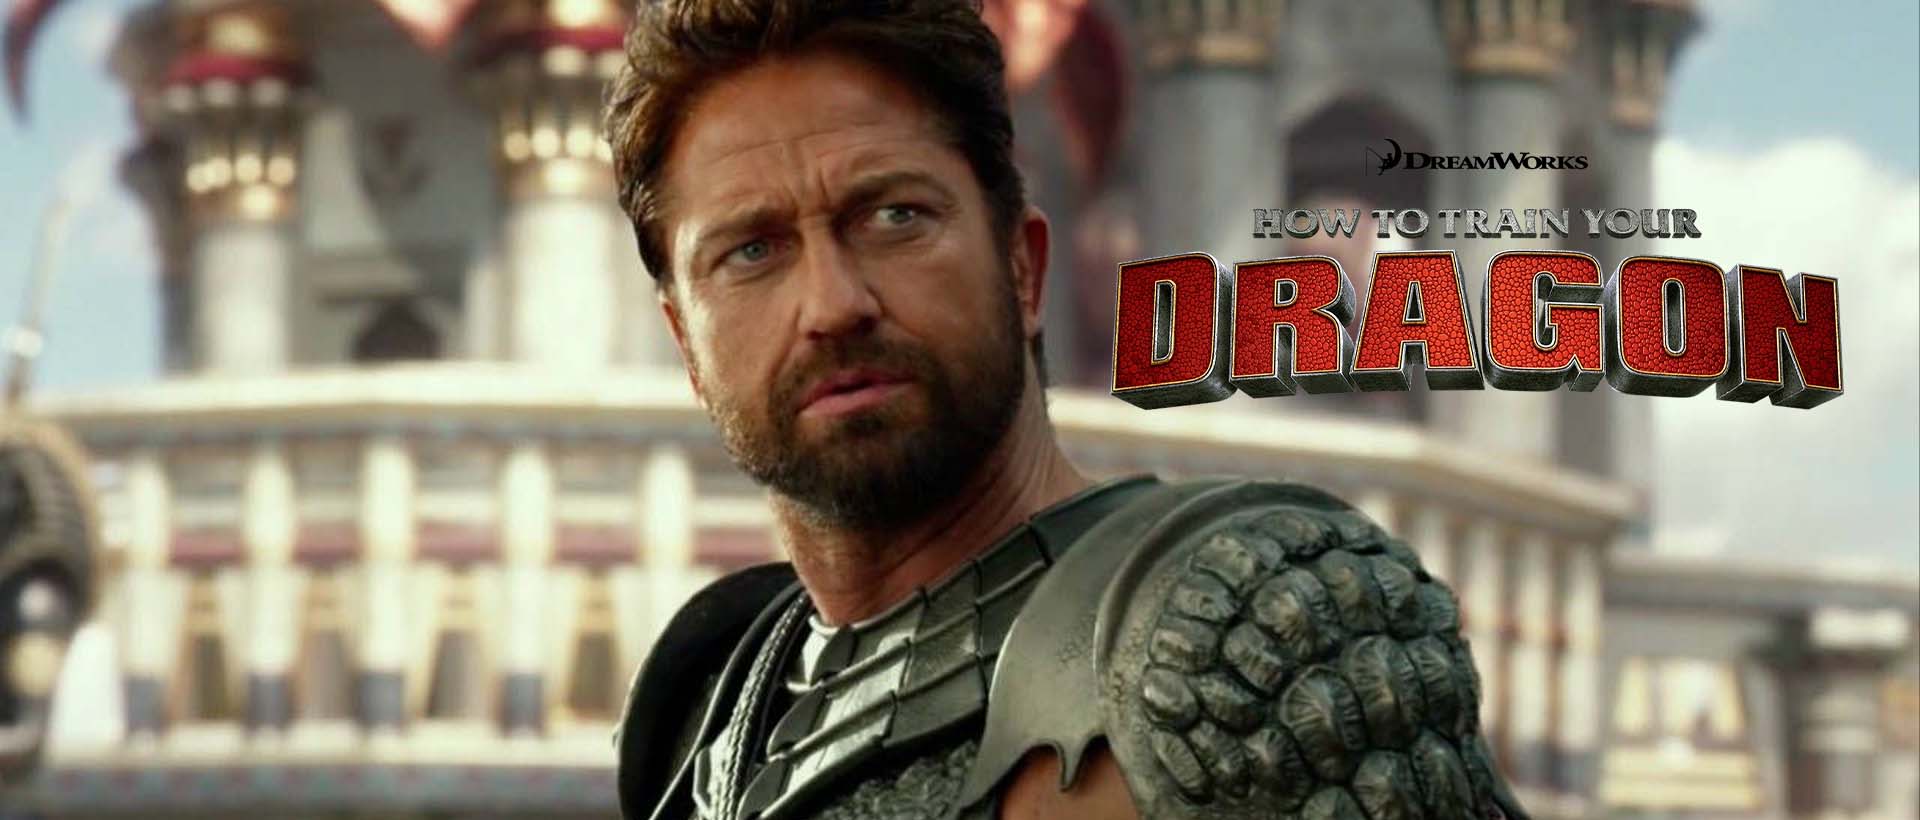 gerard butler how to train your dragon banner